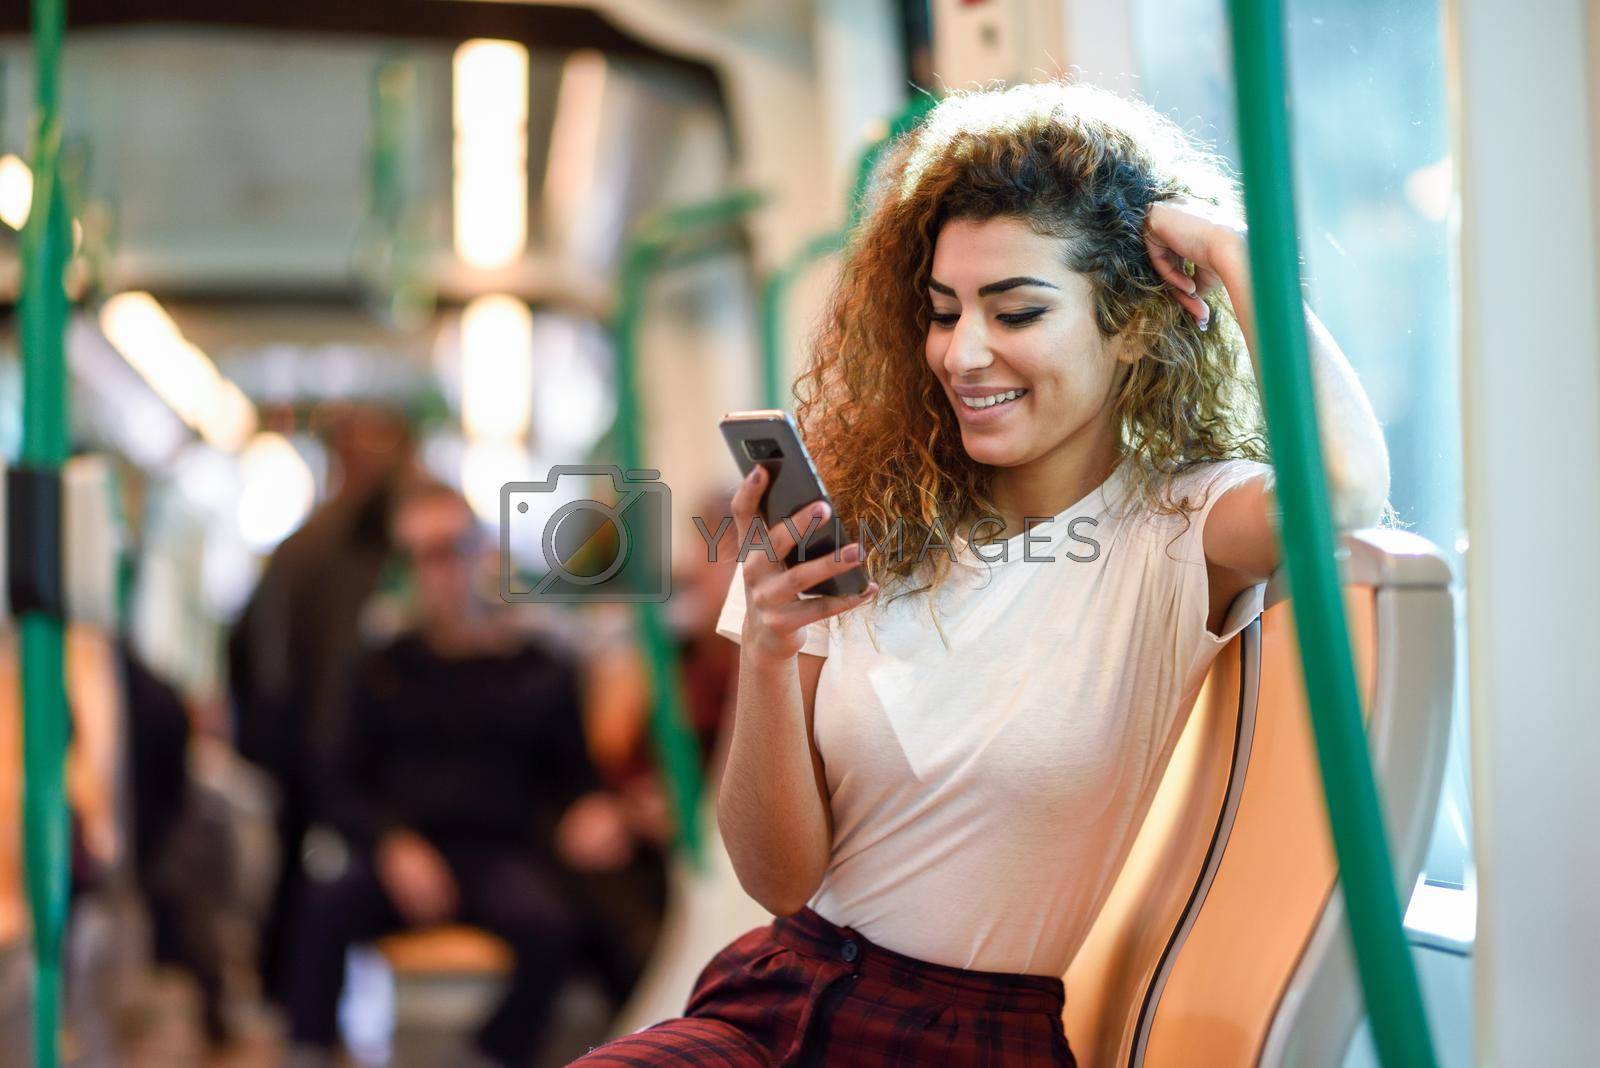 Young Arab woman inside subway train looking at her smart phone. Female in casual clothes.